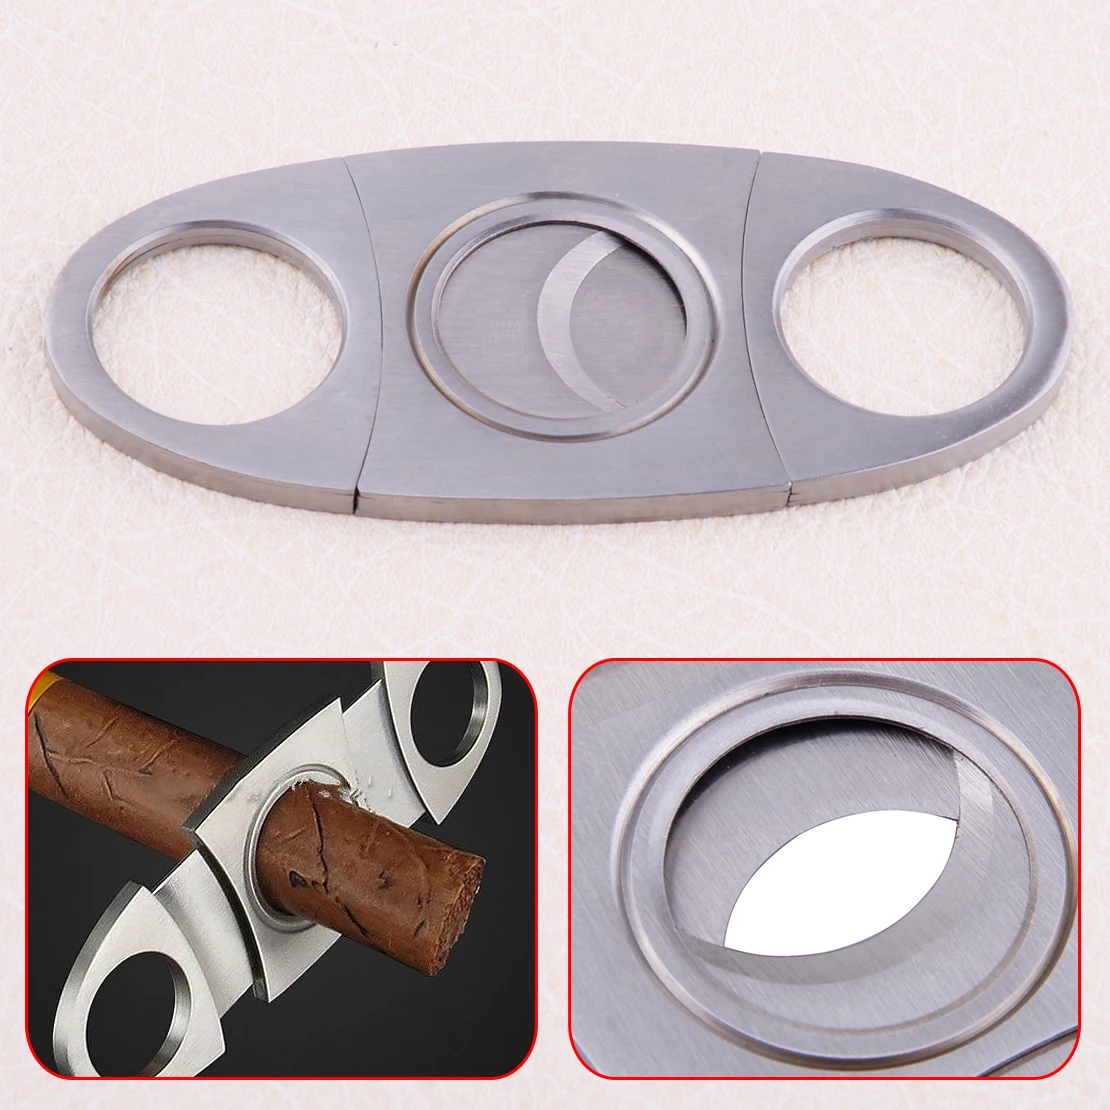 

High Quality Silver Stainless Steel Pocket Double Blades Cigar Cutter Knife Scissors Shears Tool